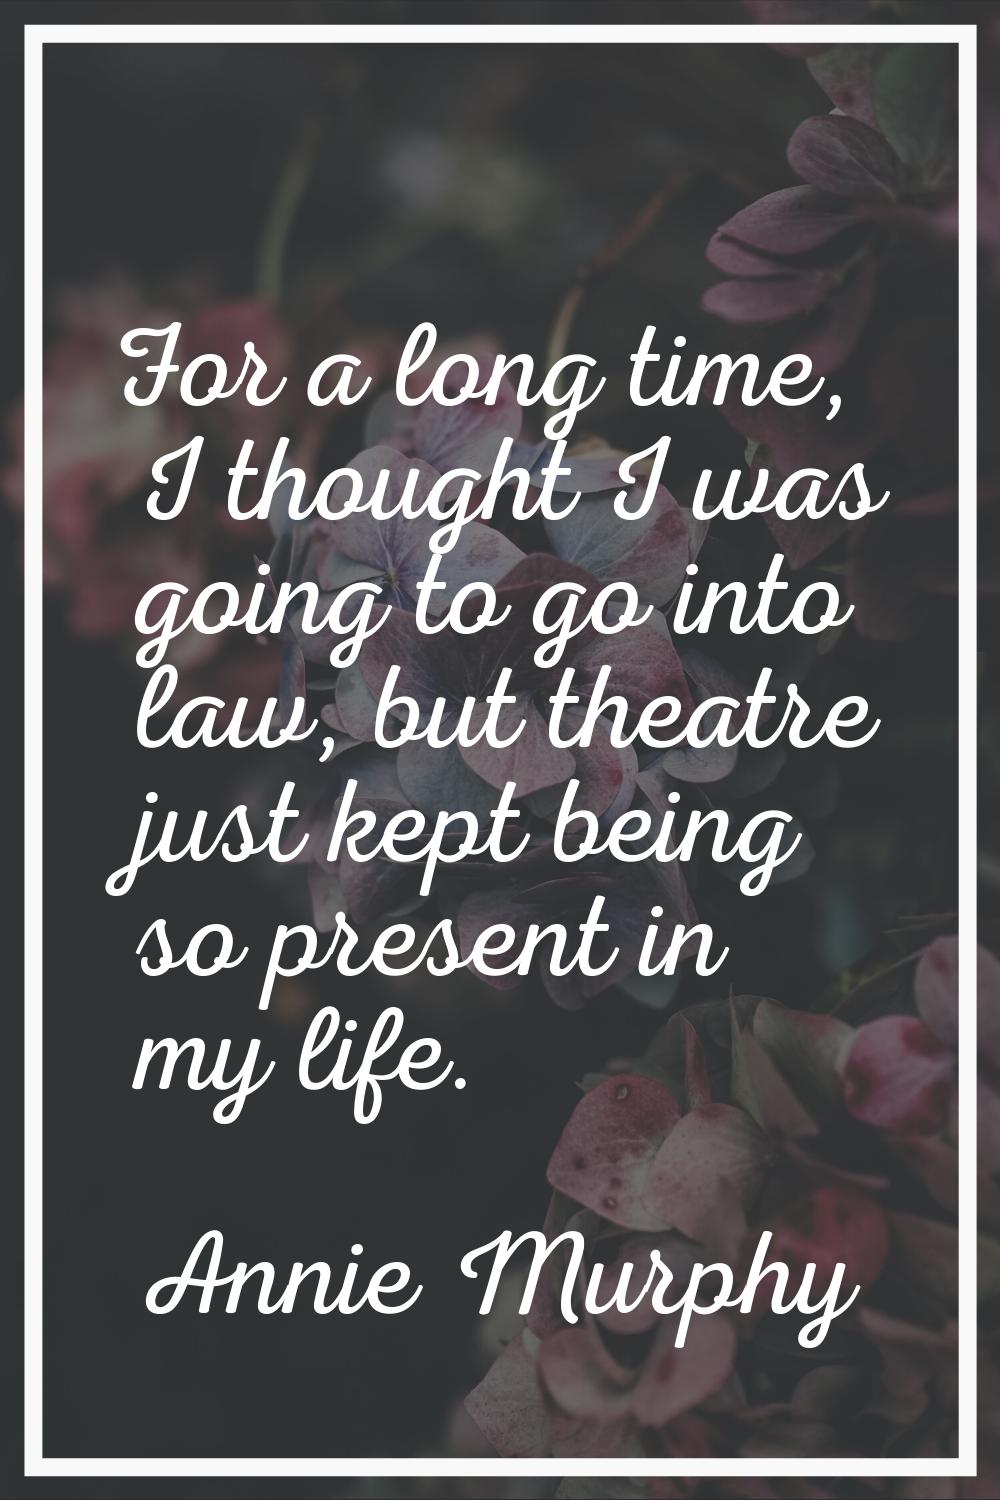 For a long time, I thought I was going to go into law, but theatre just kept being so present in my